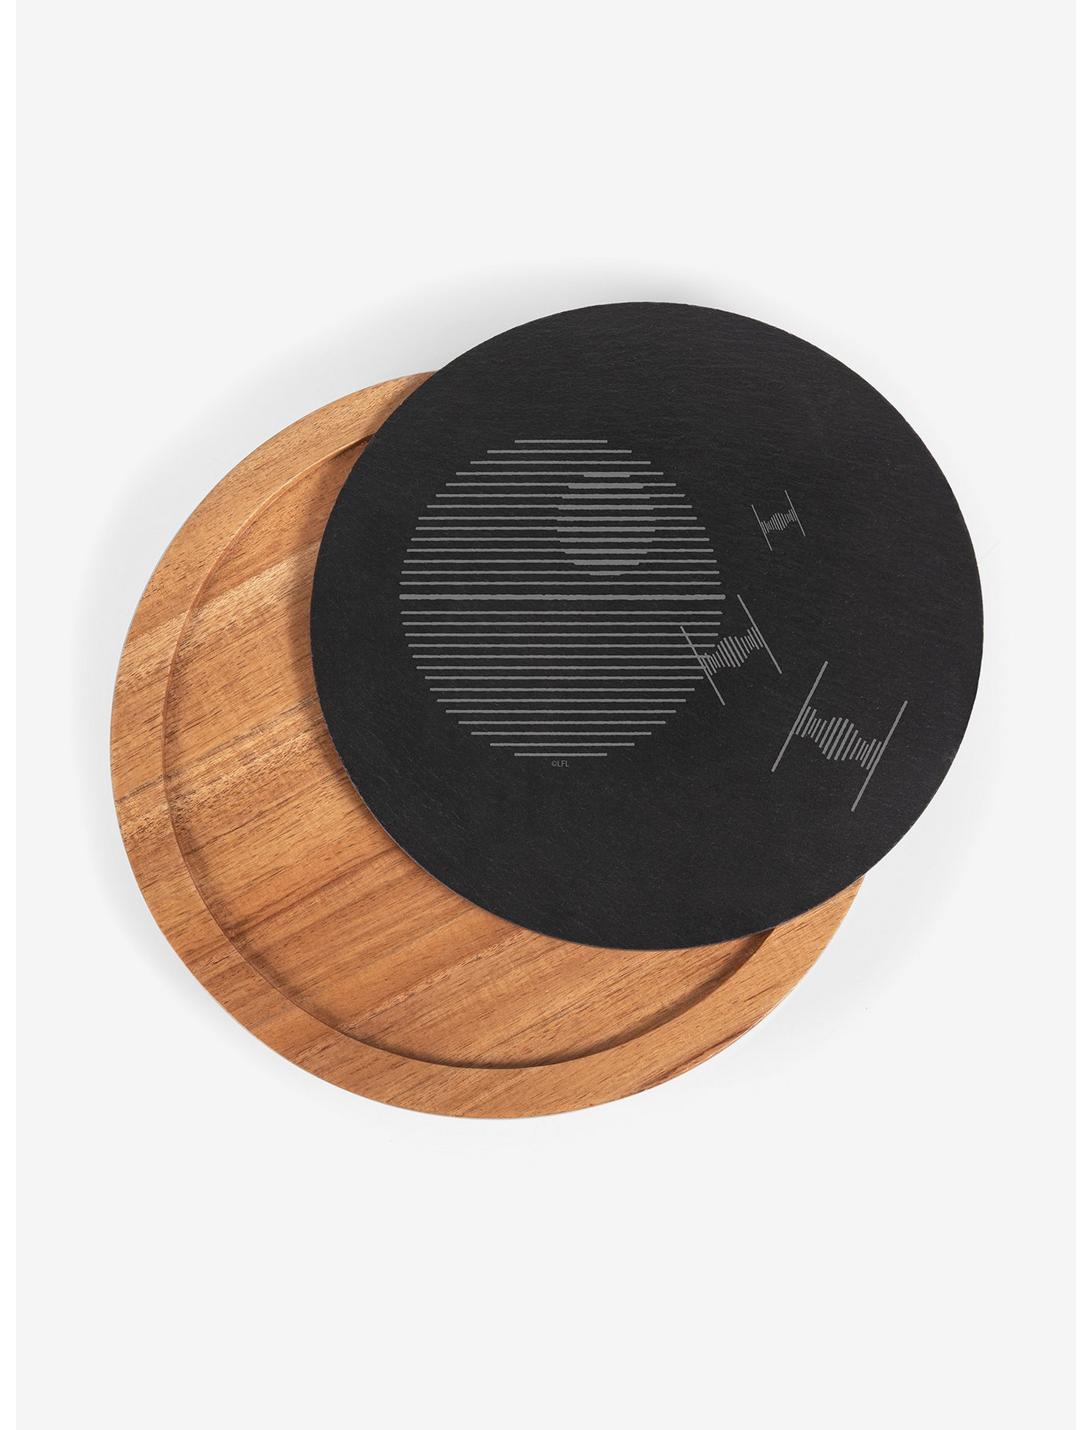 Star Wars Death Star Insignia Acacia And Slate Serving Board With Cheese Tools Set, , hi-res